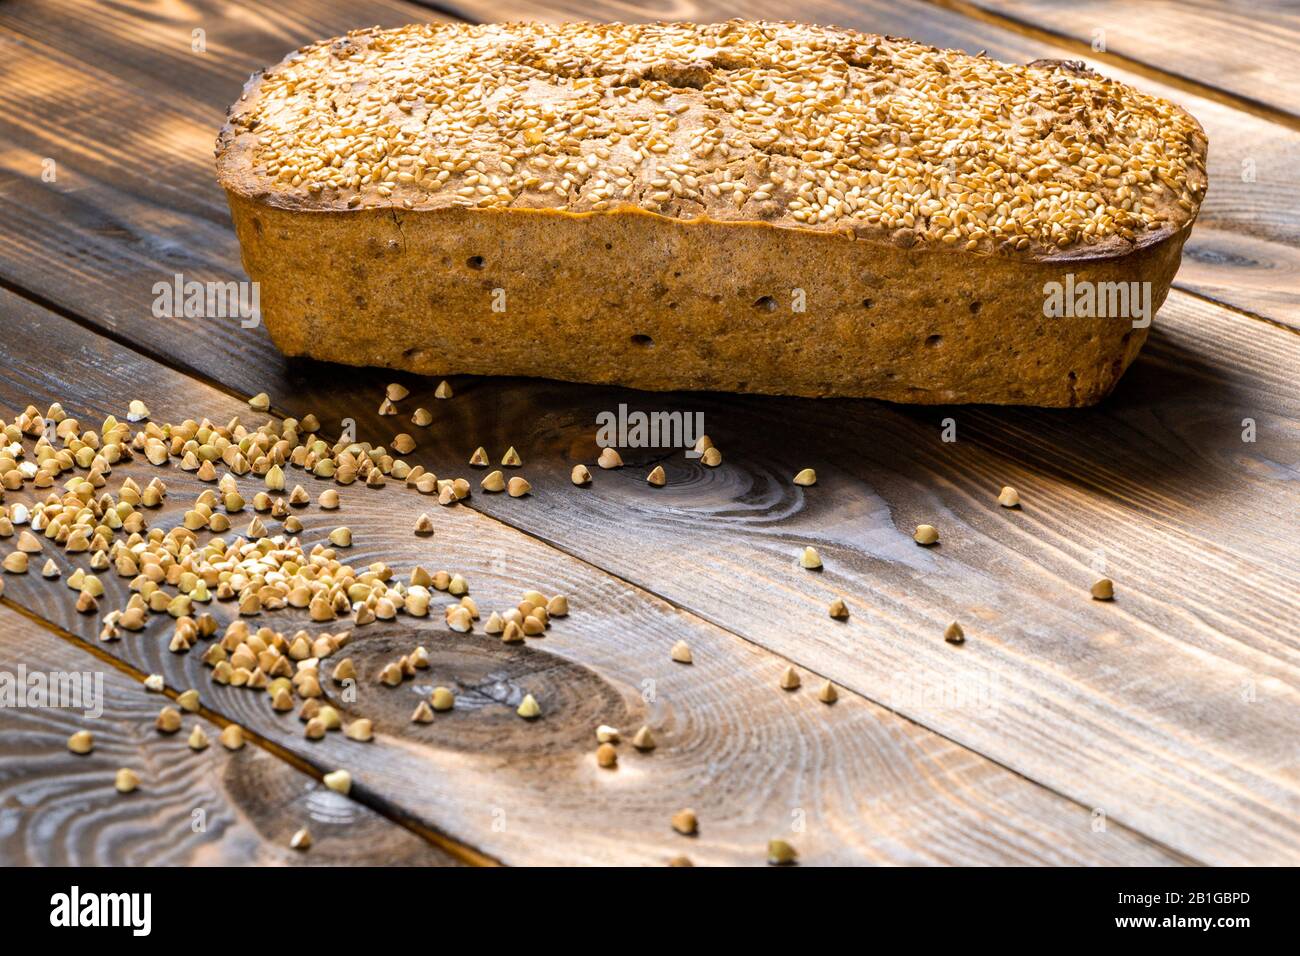 Gluten-free buckwheat bread with a golden brown crust, sprinkled with sesame seeds, lies on a wooden table. Healthy homemade recipe. Grains of green Stock Photo